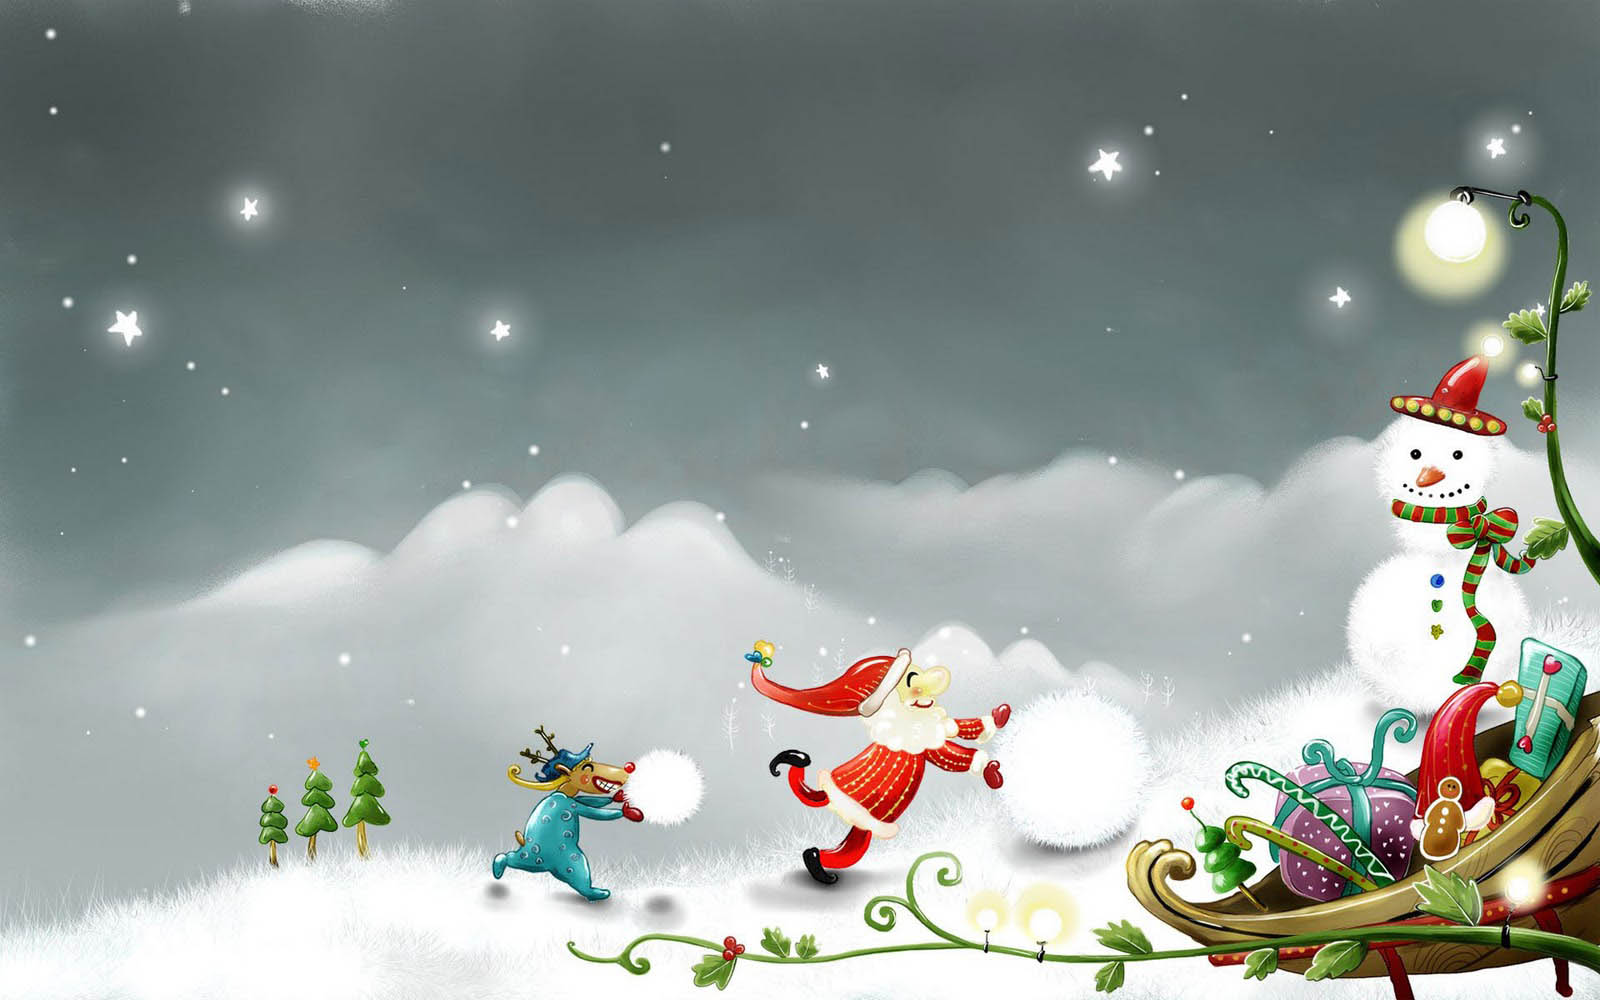 Tag Snowman Background Wallpaper Photos Pictures And Image For